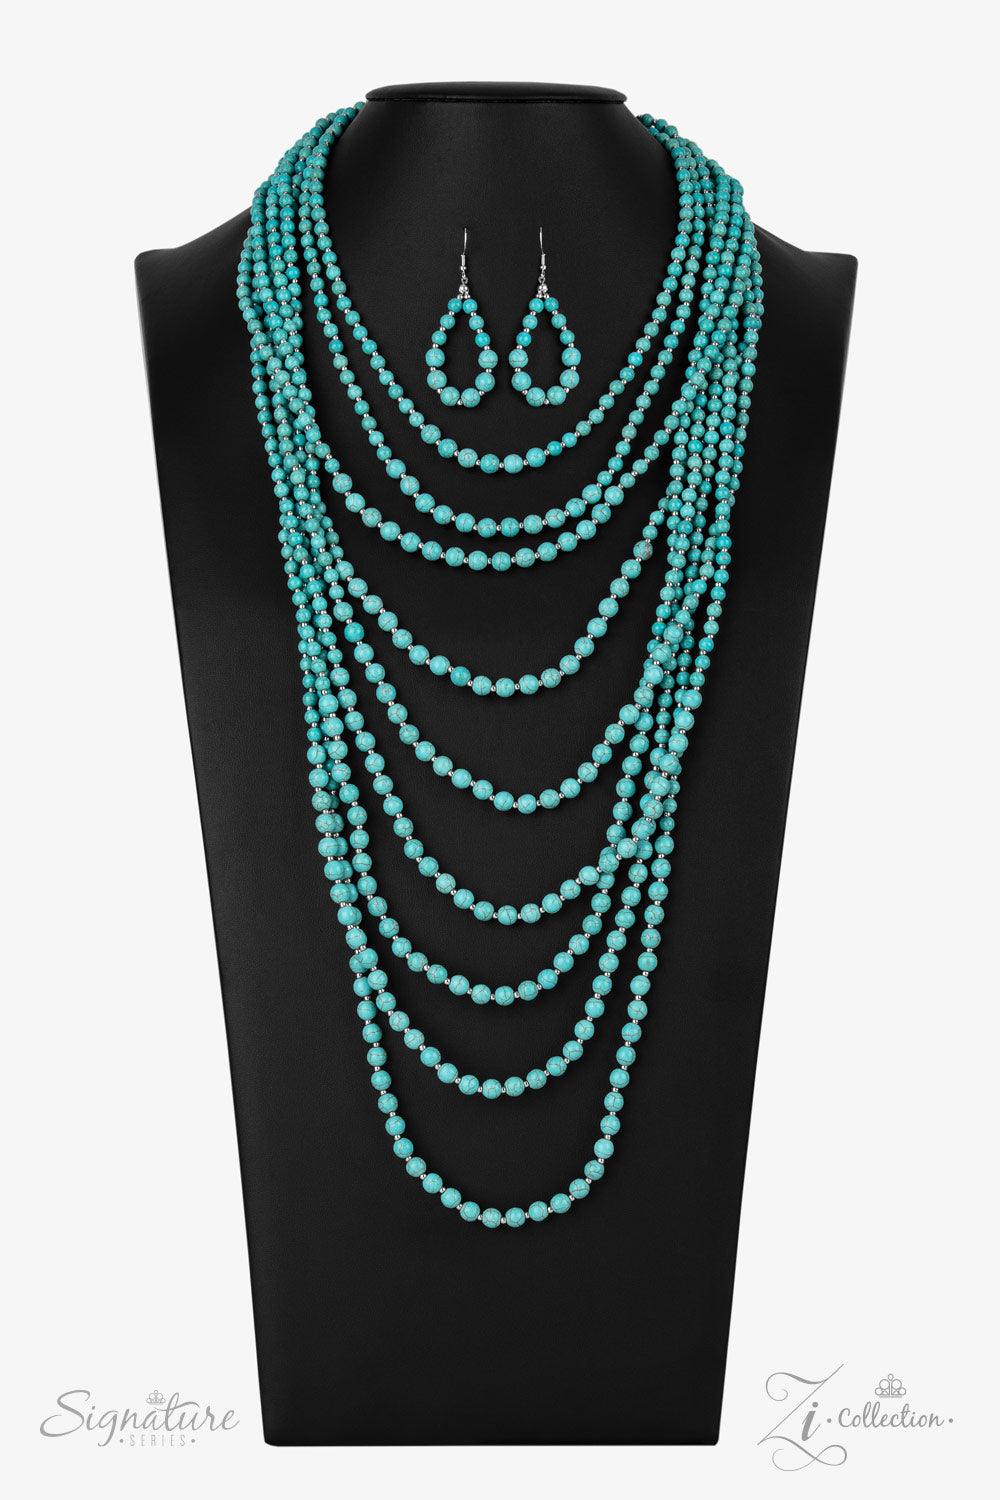 Paparazzi Accessories The Hilary Intermixed with dainty silver beads, a groundbreaking display of refreshing turquoise stone beads gradually increases in size as they drape into artisan inspired layers down the chest. The trailblazing length combined with